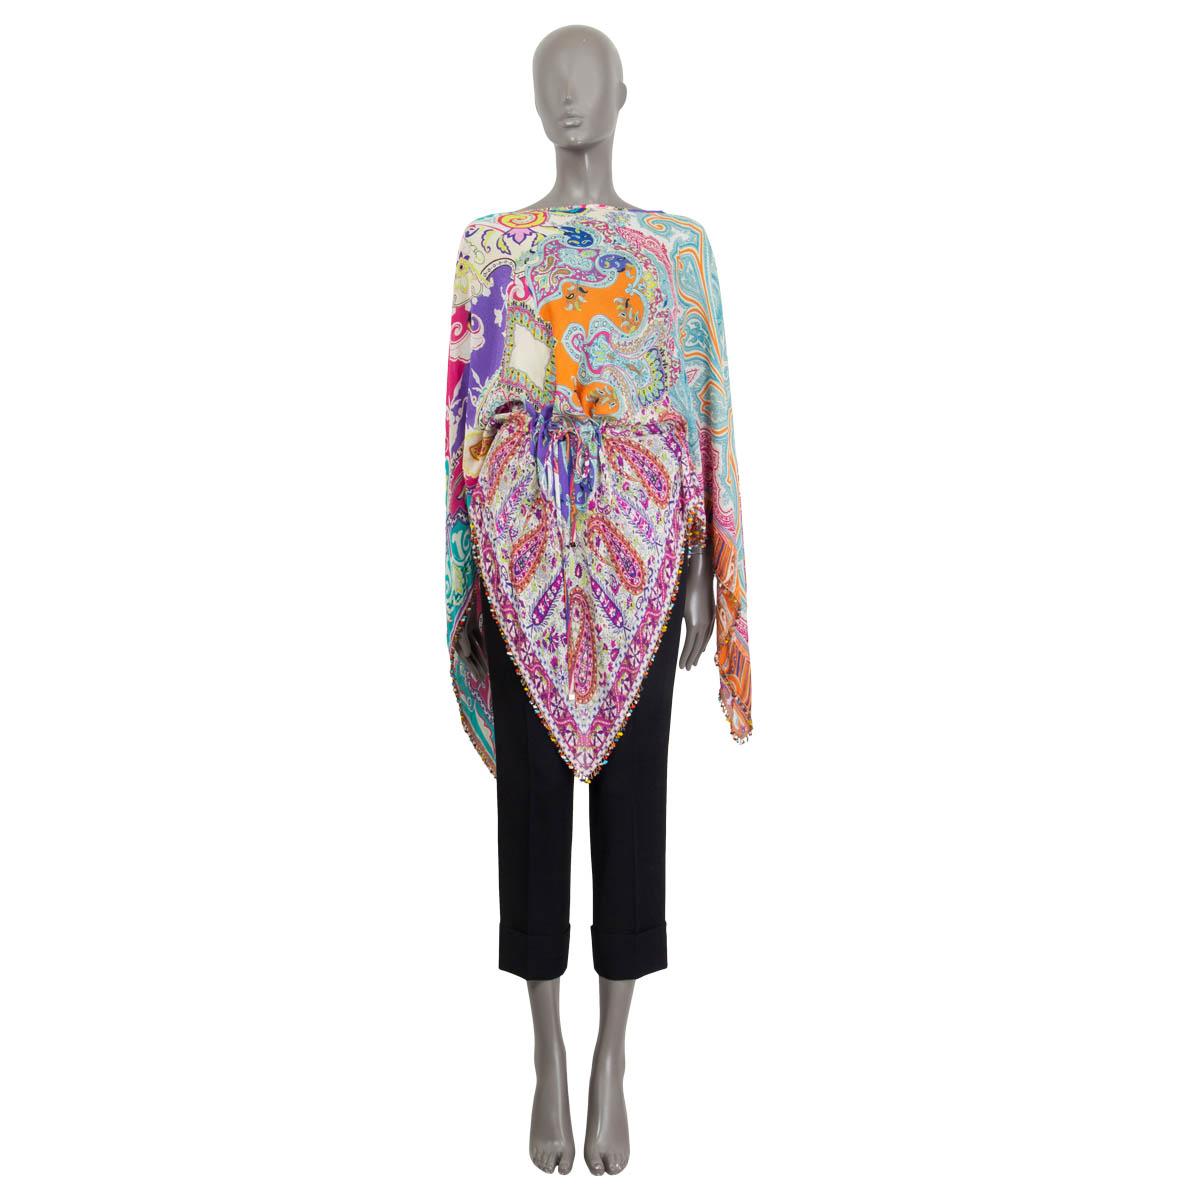 100% authentic Etro multicolour paisley print tunic blouse in turquoise, pink, blue, white and lime silk (100%). Features an handkerchief hemline embellished with multicolored beads. Has a drawstring closure. Unlined. Has been worn once and is in